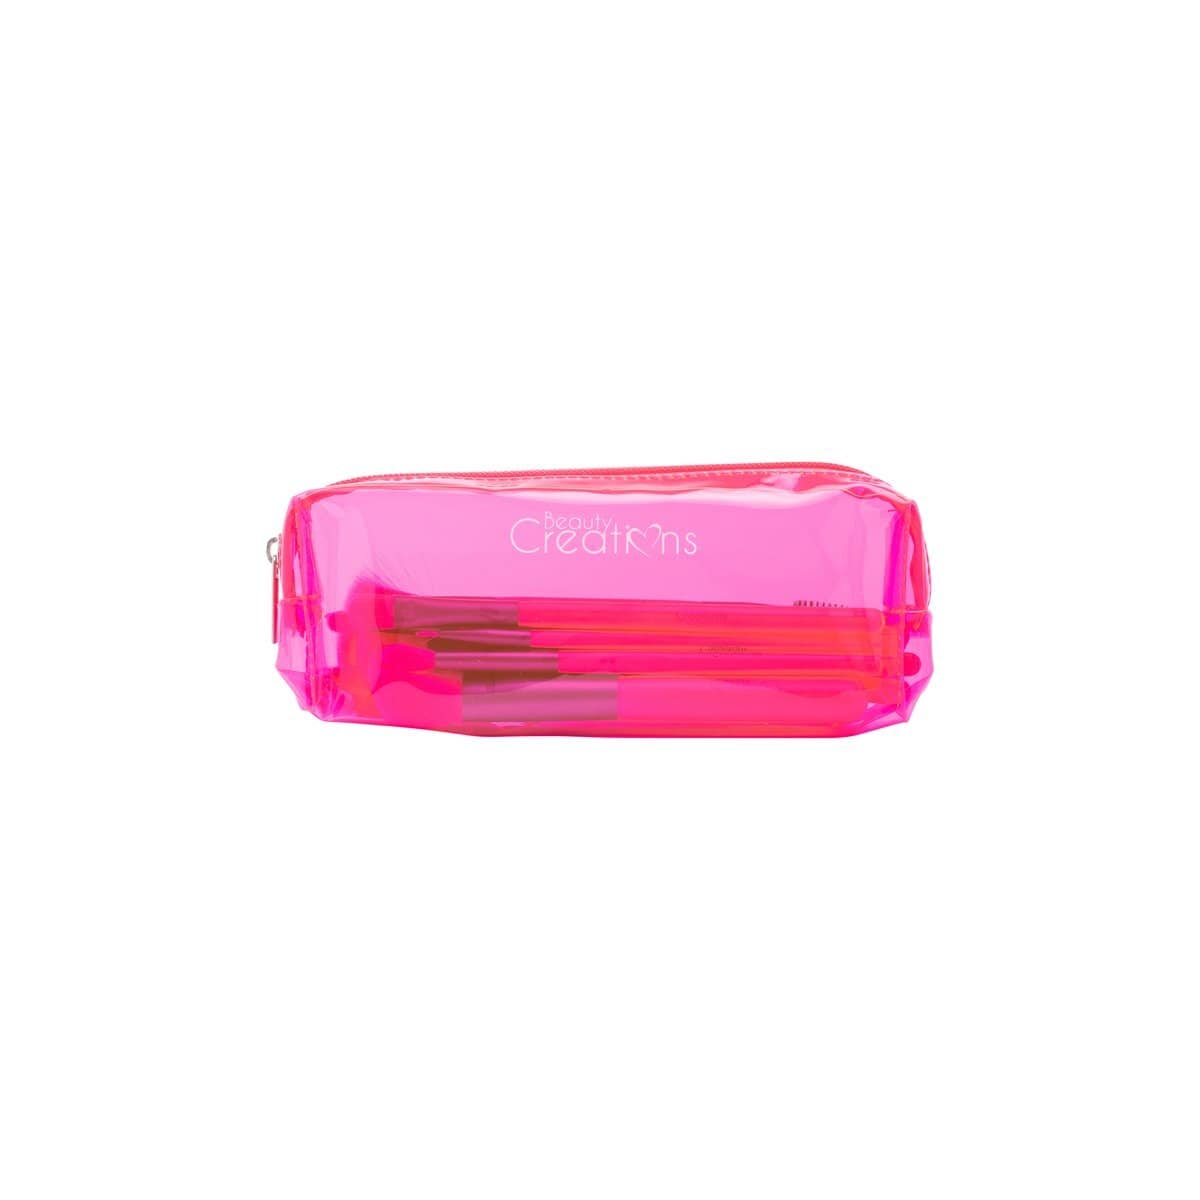 BOMB AF NEON PINK BRUSH SET - BEAUTY CREATIONS